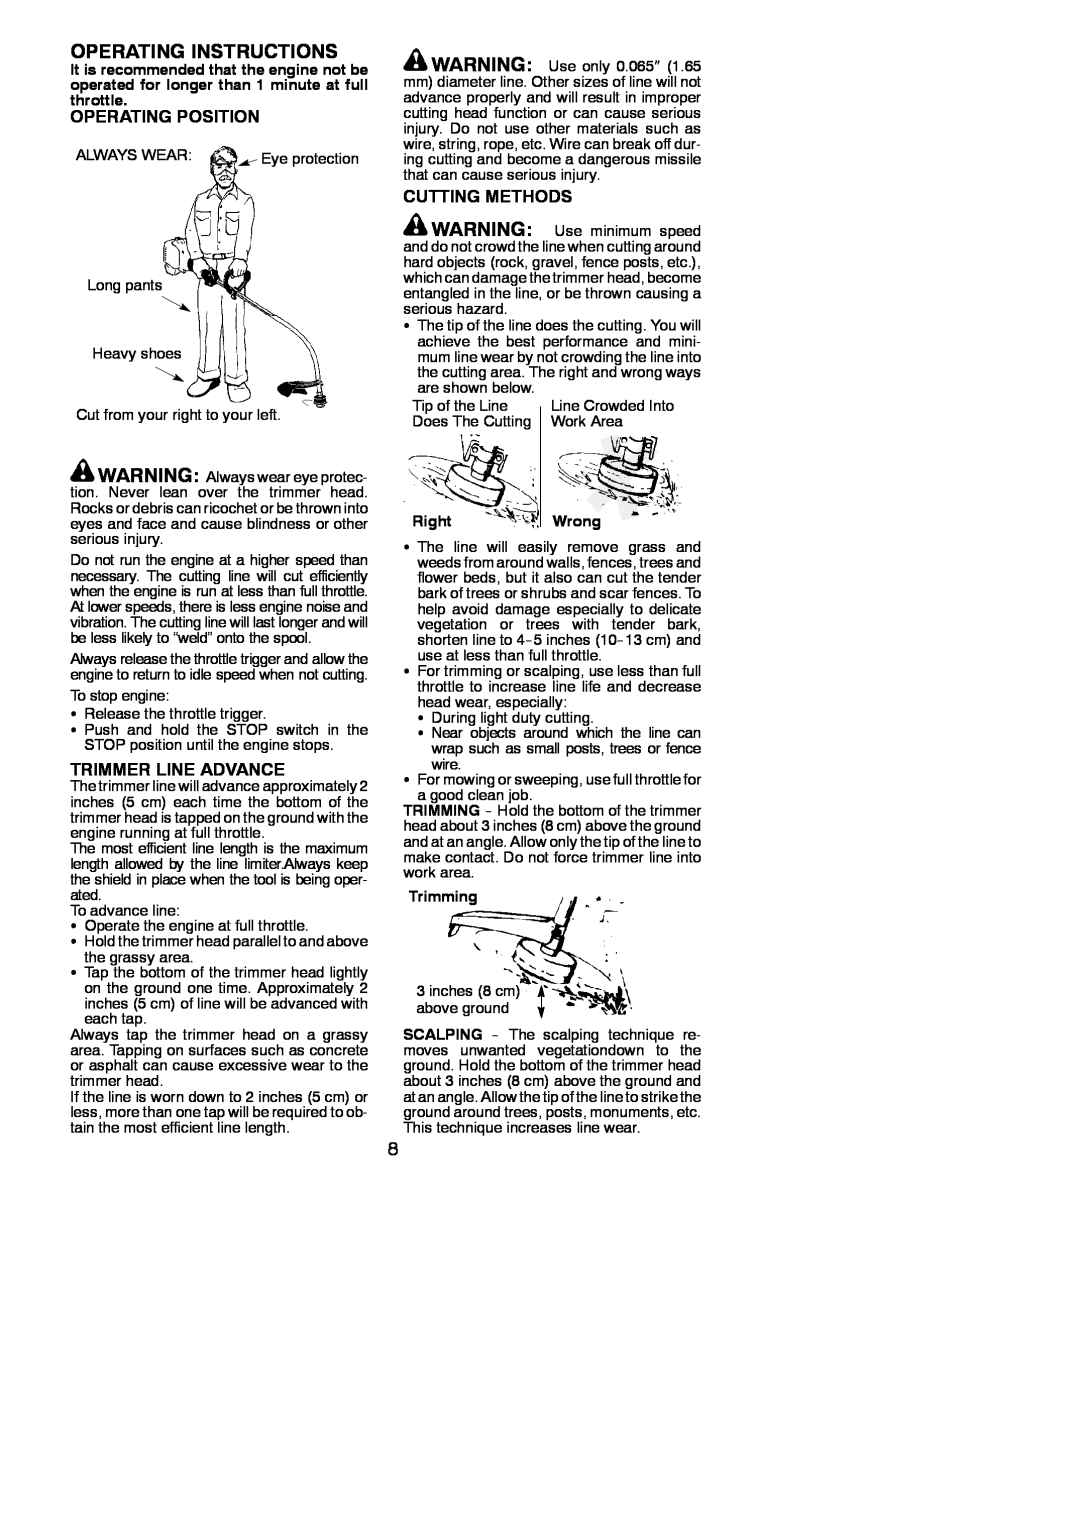 Weed Eater FL23 Operating Instructions, Operating Position, Trimmer Line Advance, Cutting Methods, RightWrong, Trimming 